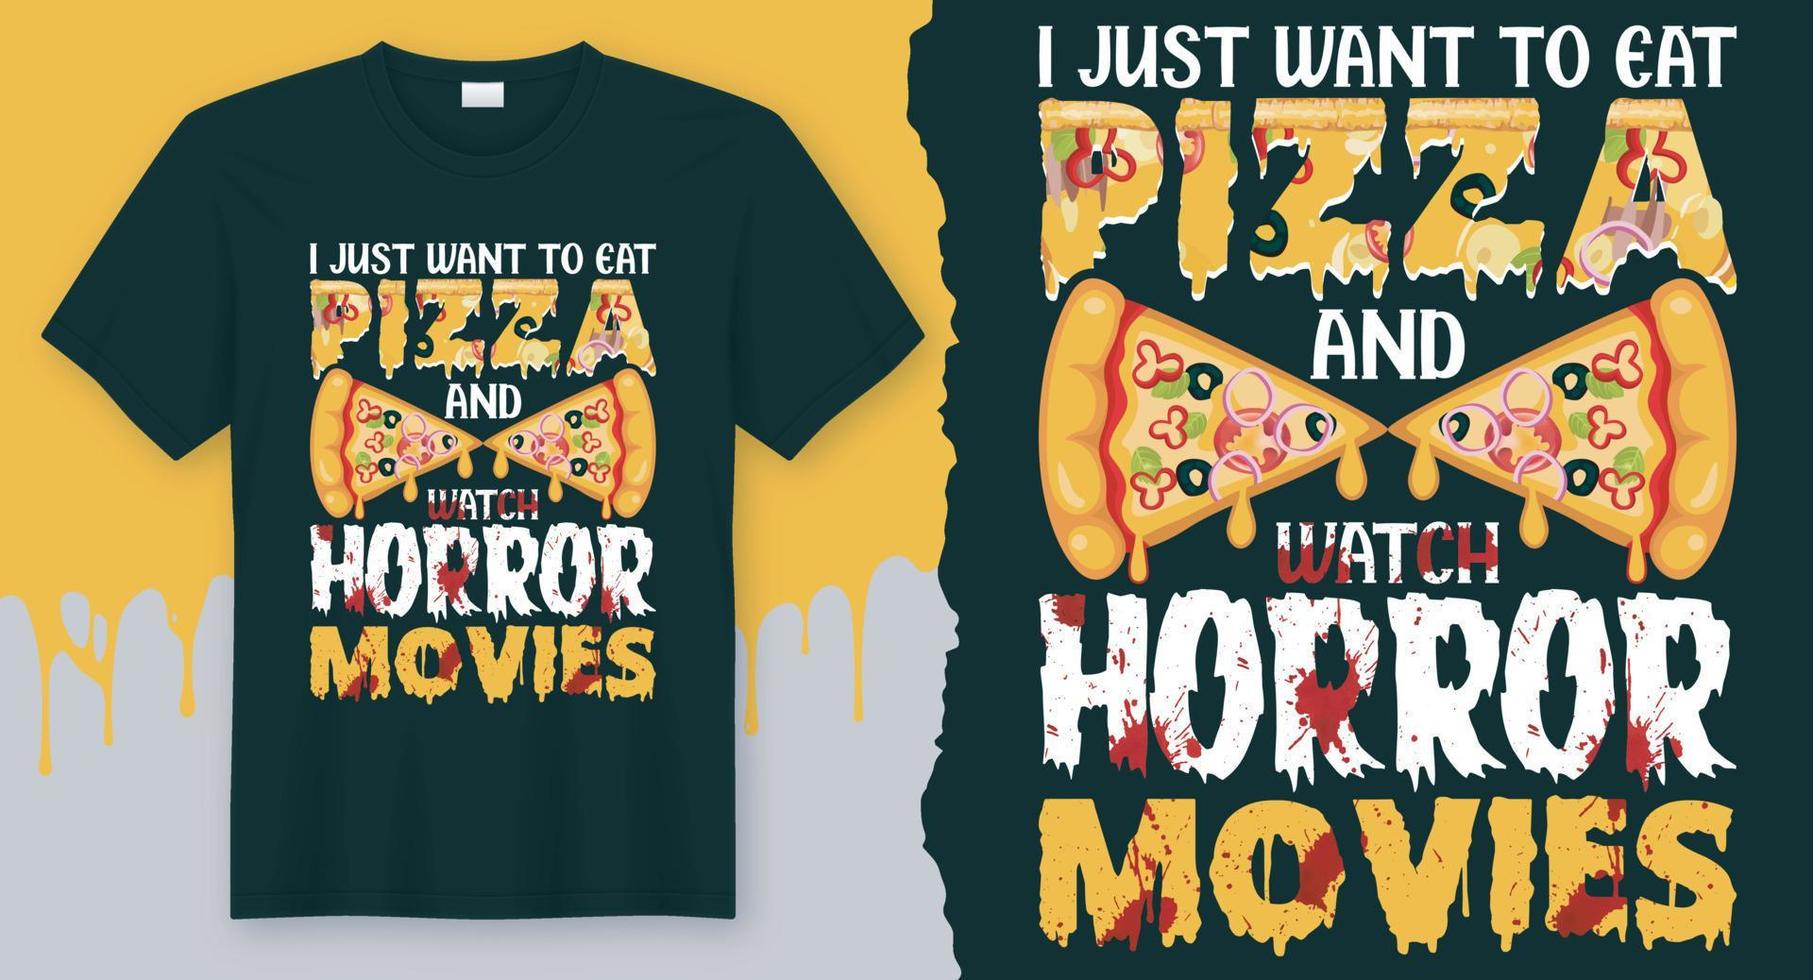 I Just Want To Eat Pizza And Watch Horror Movies, Halloween T-Shirt Design Vector for October 31